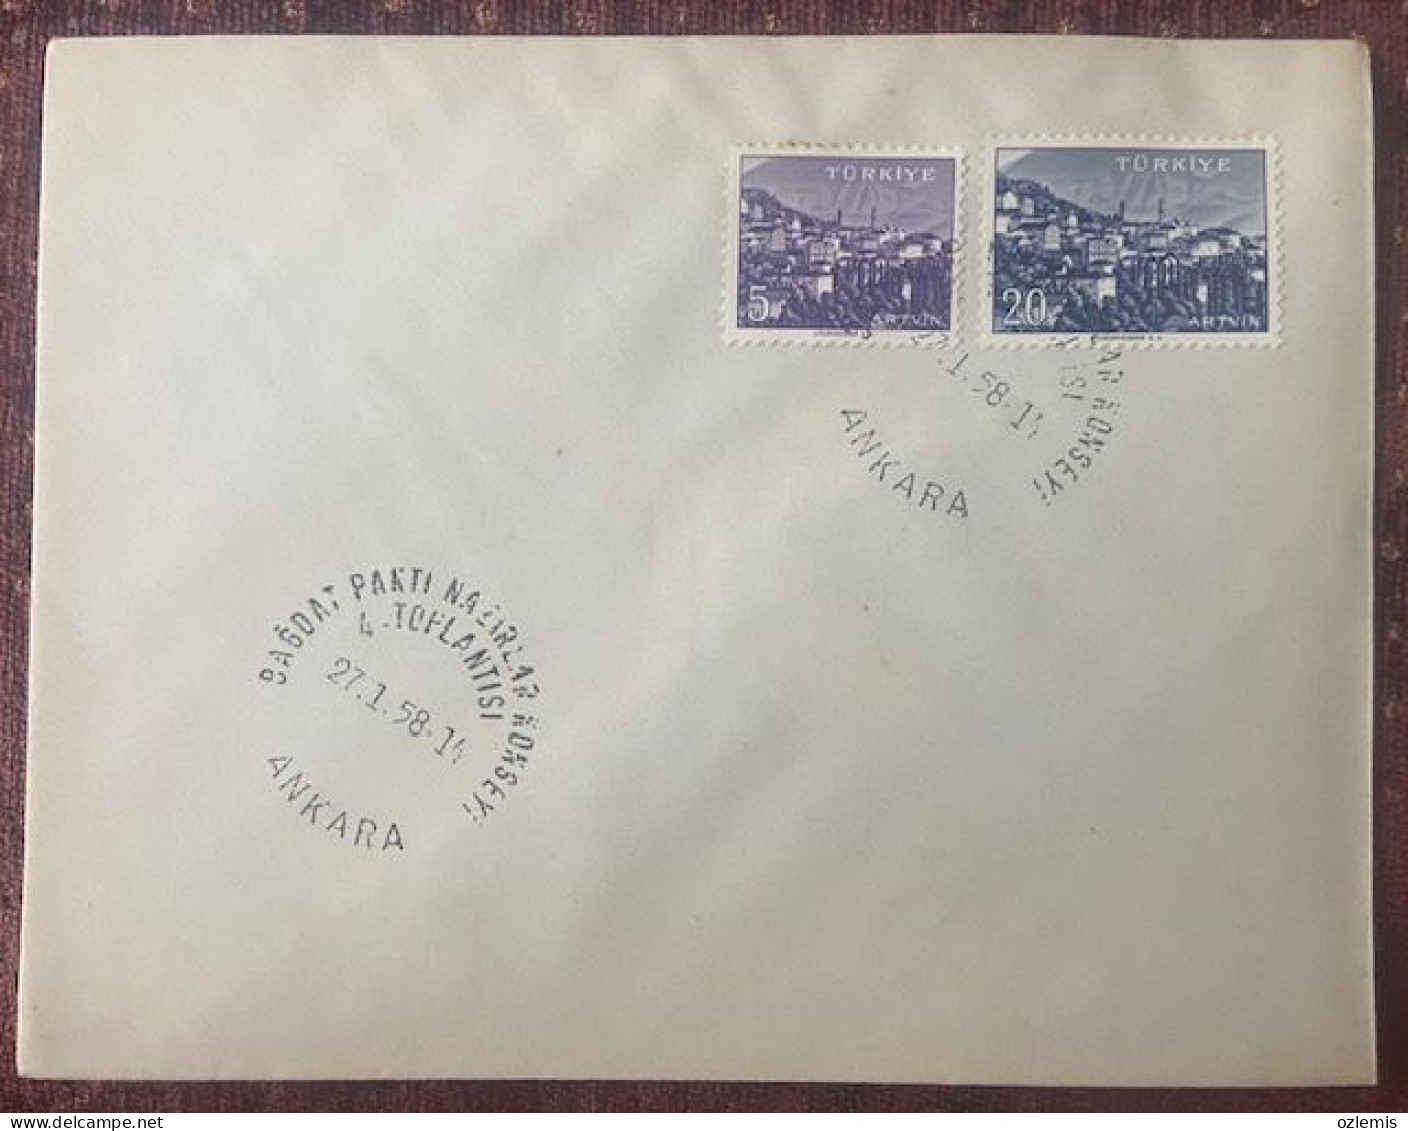 TURKEY,TURKEI,TURQUIE ,ARTVIN  ,STAMP,THE 4TH MEETING OF THE BAGDAT PACT ,1958 ,COVER - Covers & Documents